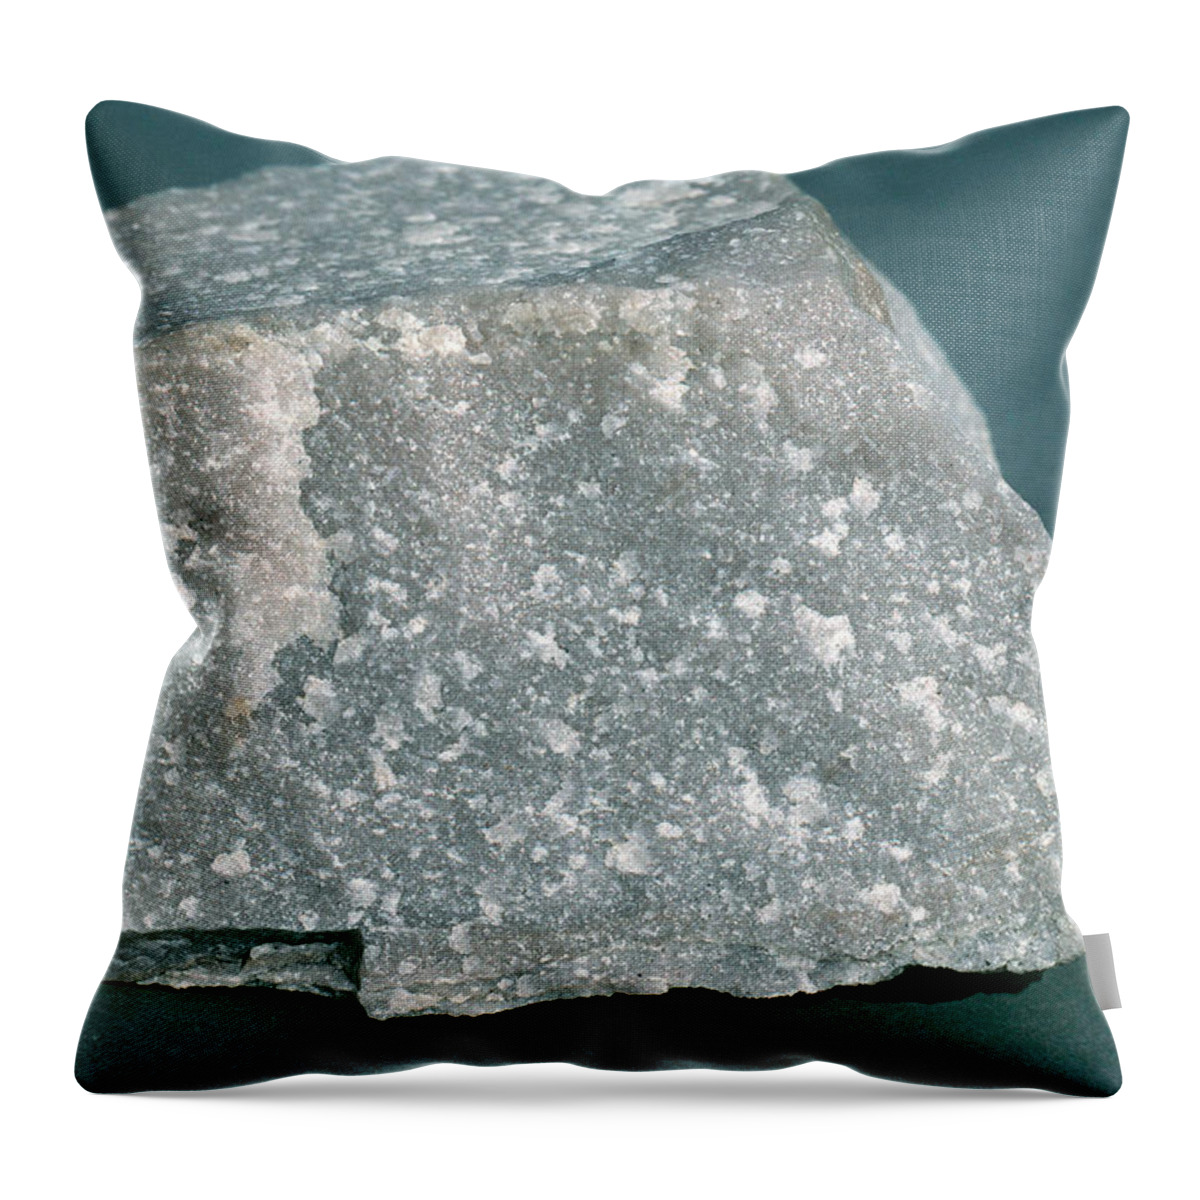 Geology Throw Pillow featuring the photograph Quartzite #1 by A.b. Joyce